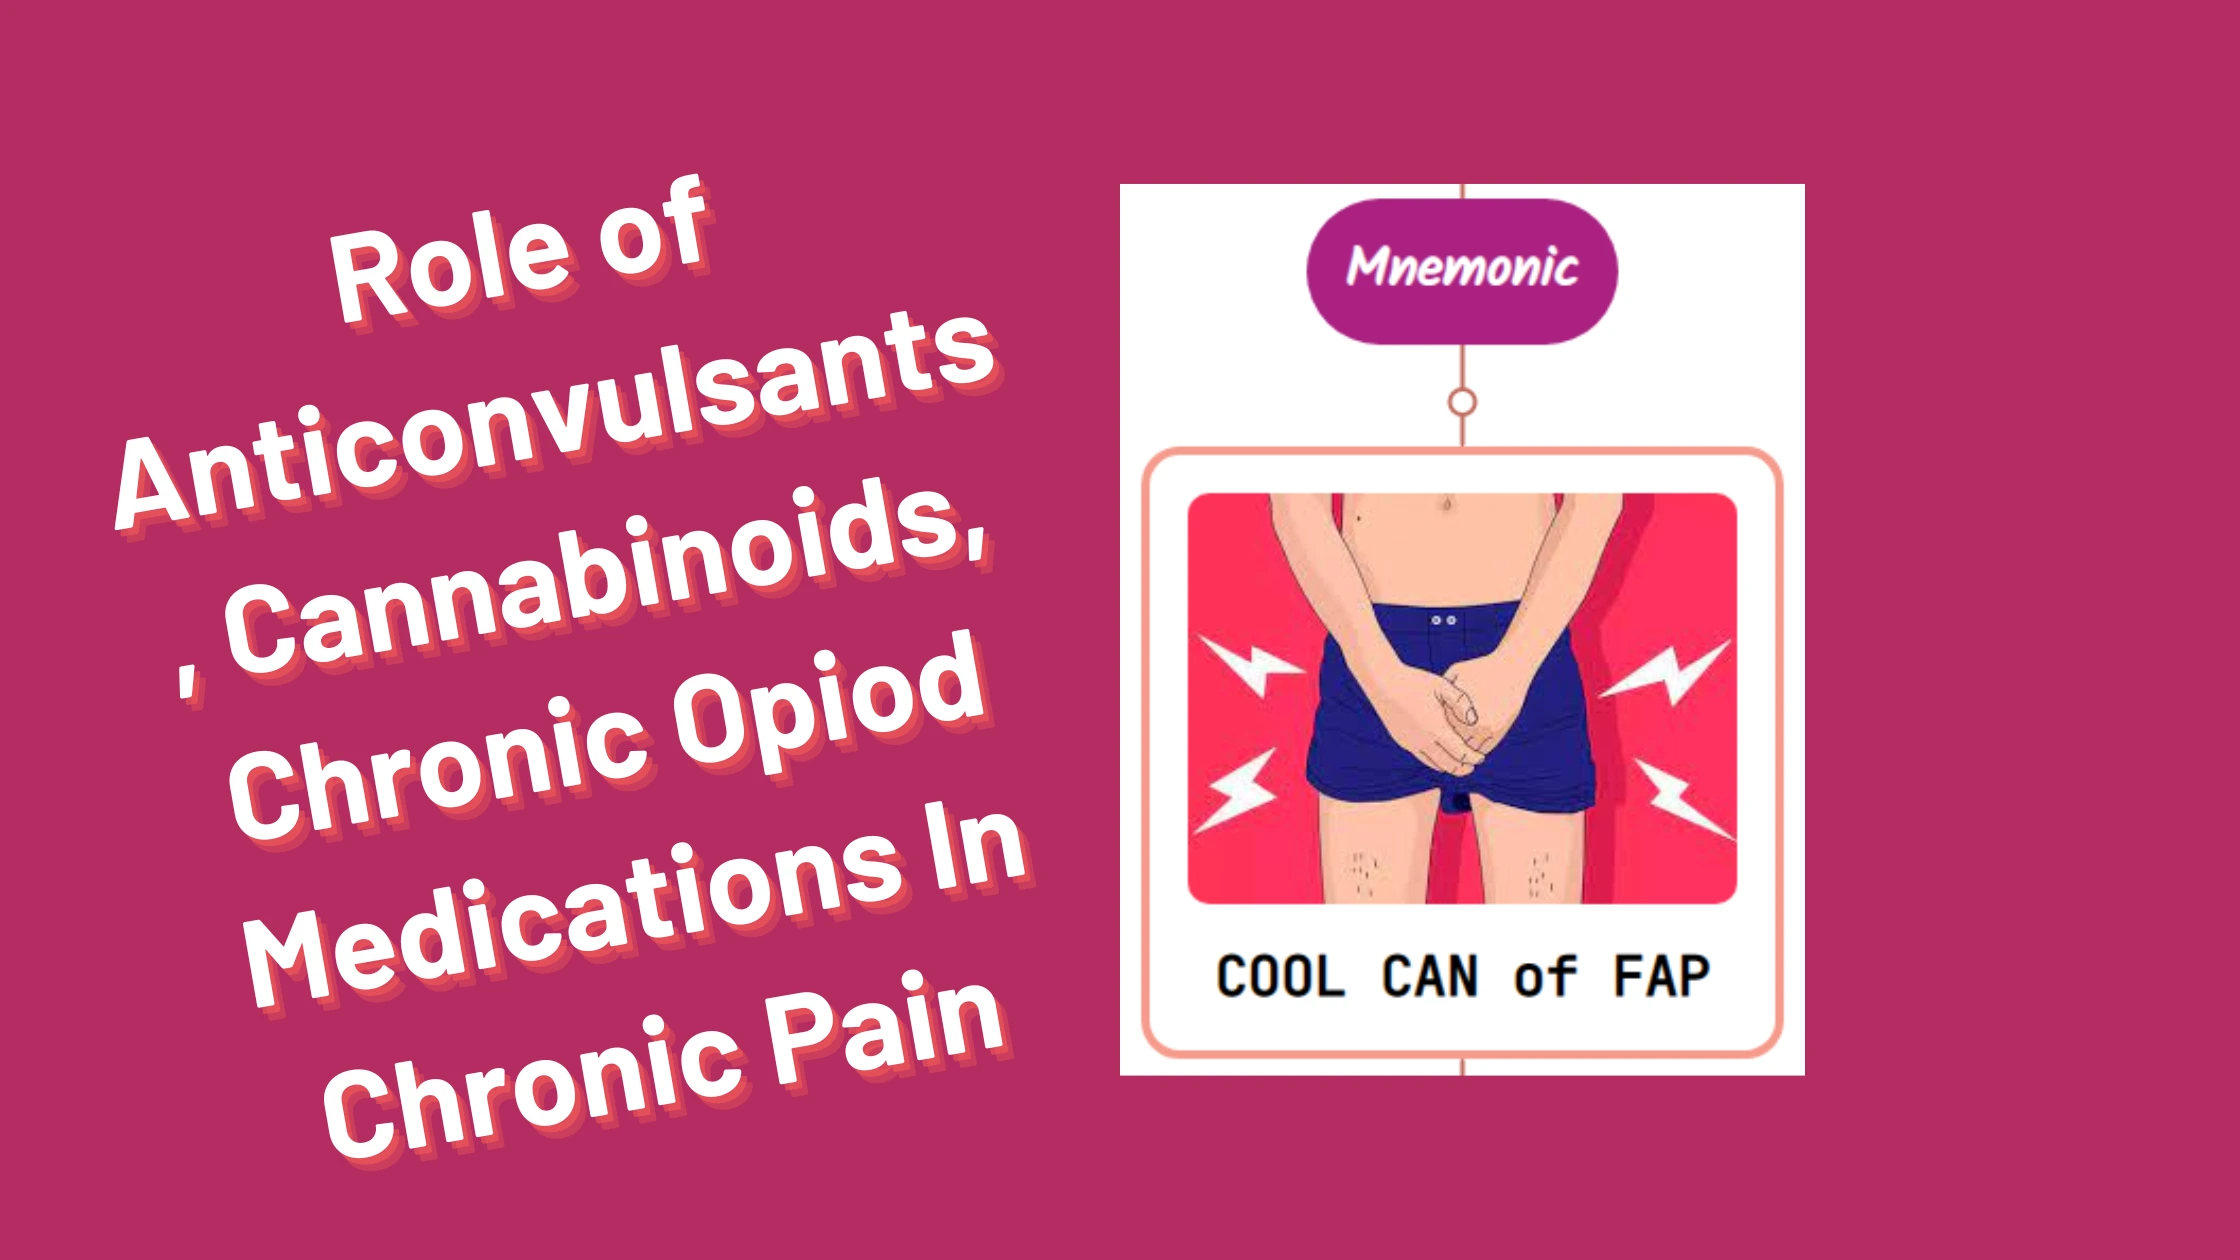 You are currently viewing Role of Anticonvulsants, Cannabinoids, Chronic Opiod Medications In Chronic Pain : Mnemonics